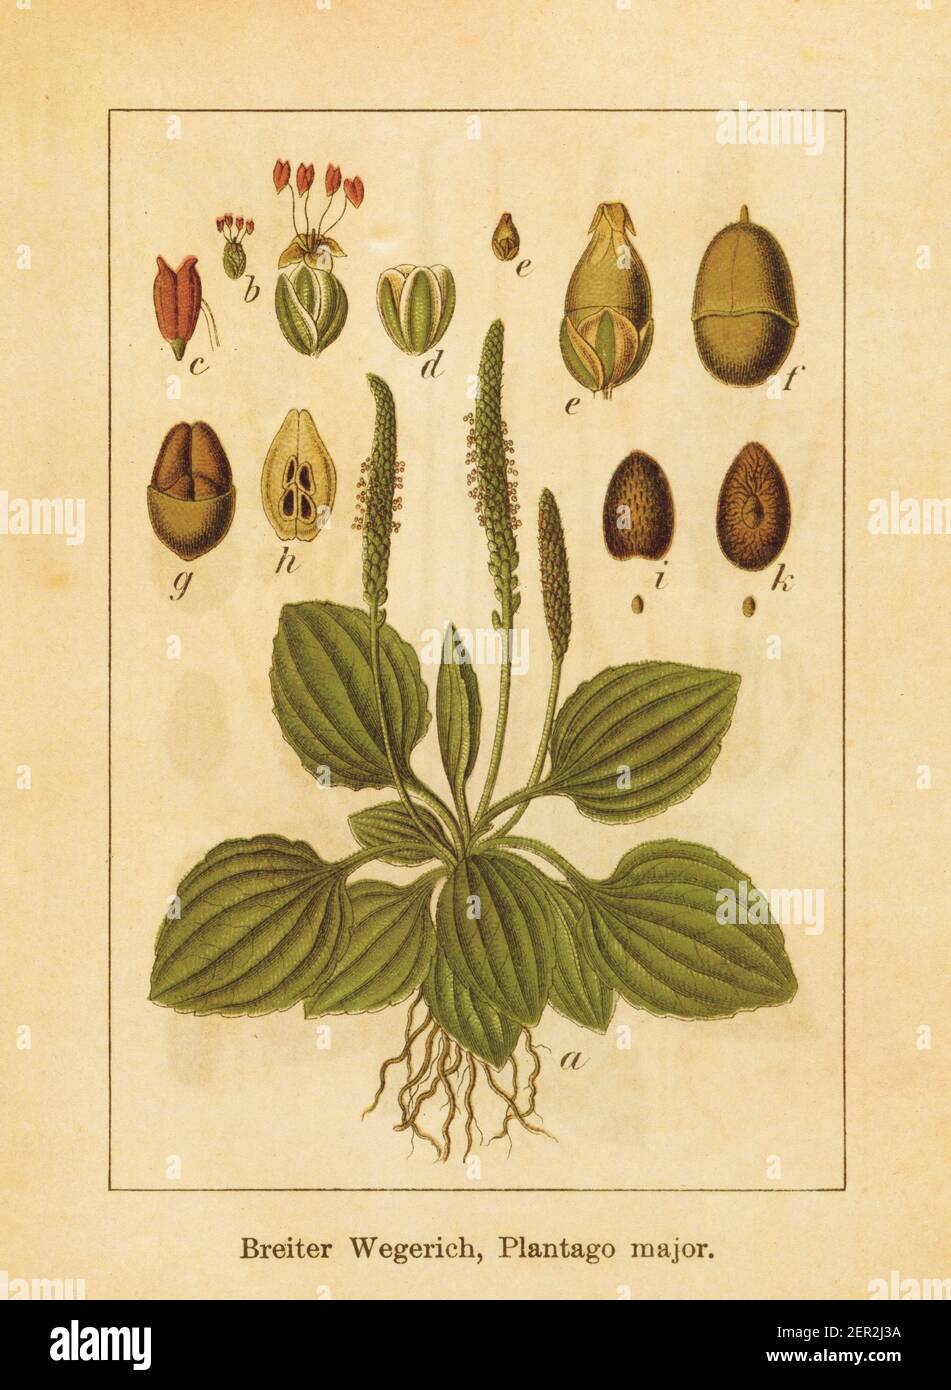 Antique illustration of a plantago major, also known as common plantain or greater plantain. Engraved by Jacob Sturm (1771-1848) and published in the Stock Photo